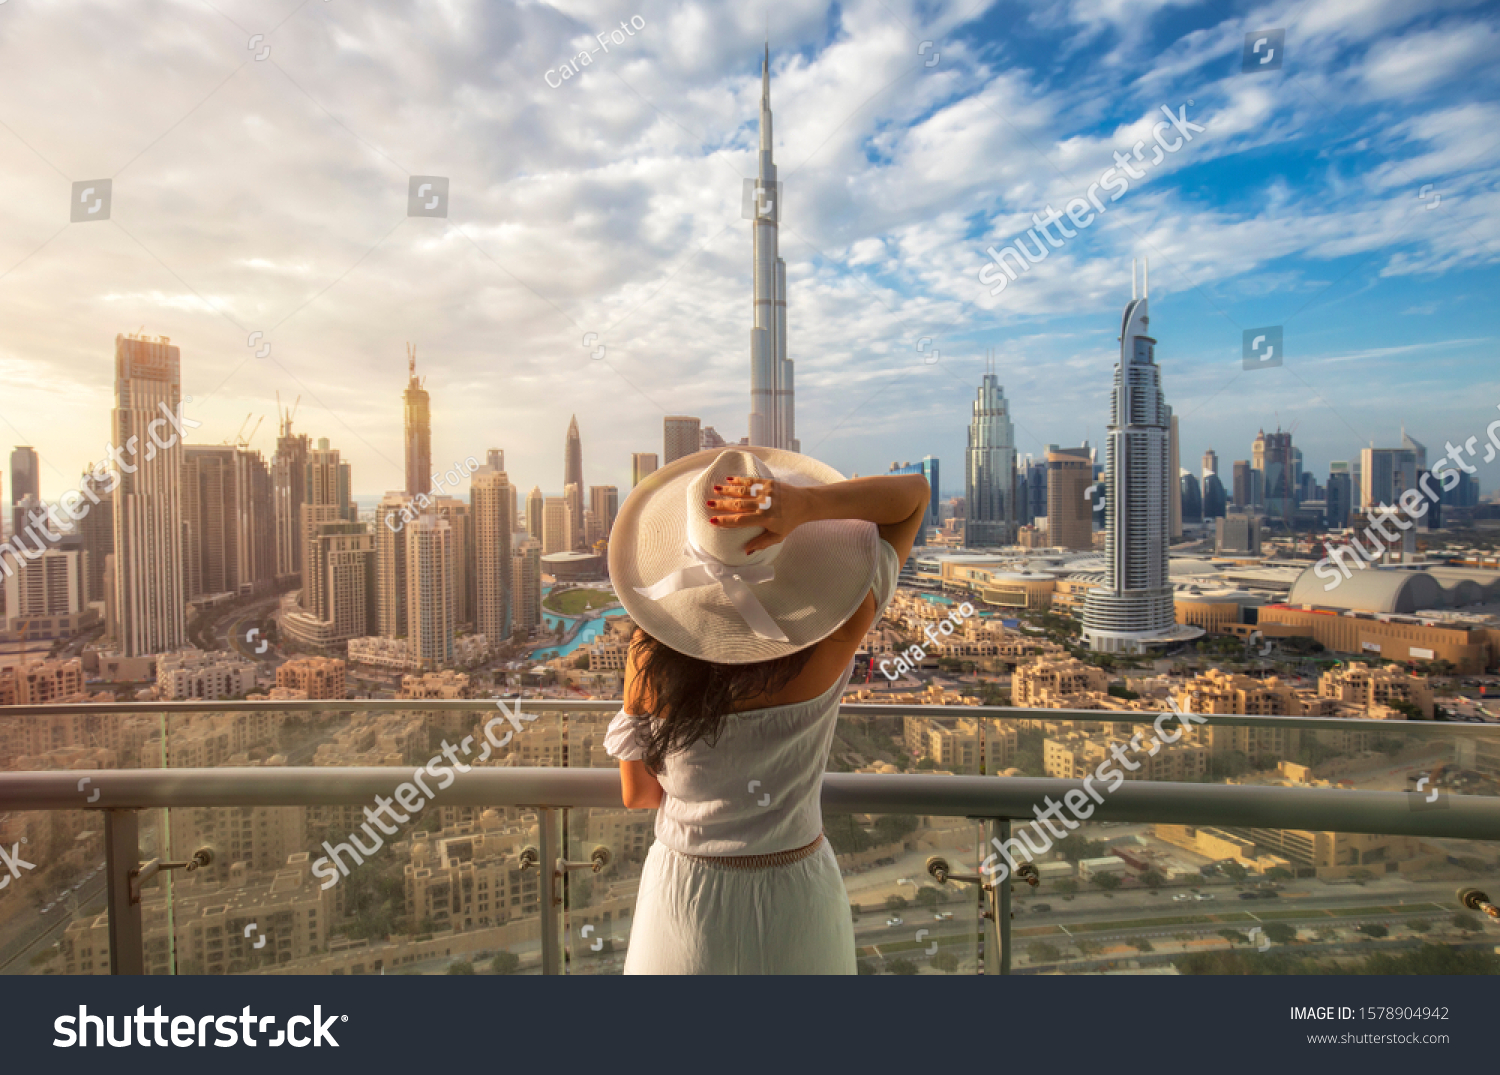 Woman with a white hat is standing on a balcony in front of the skyline from Dubai
Downtown #1578904942